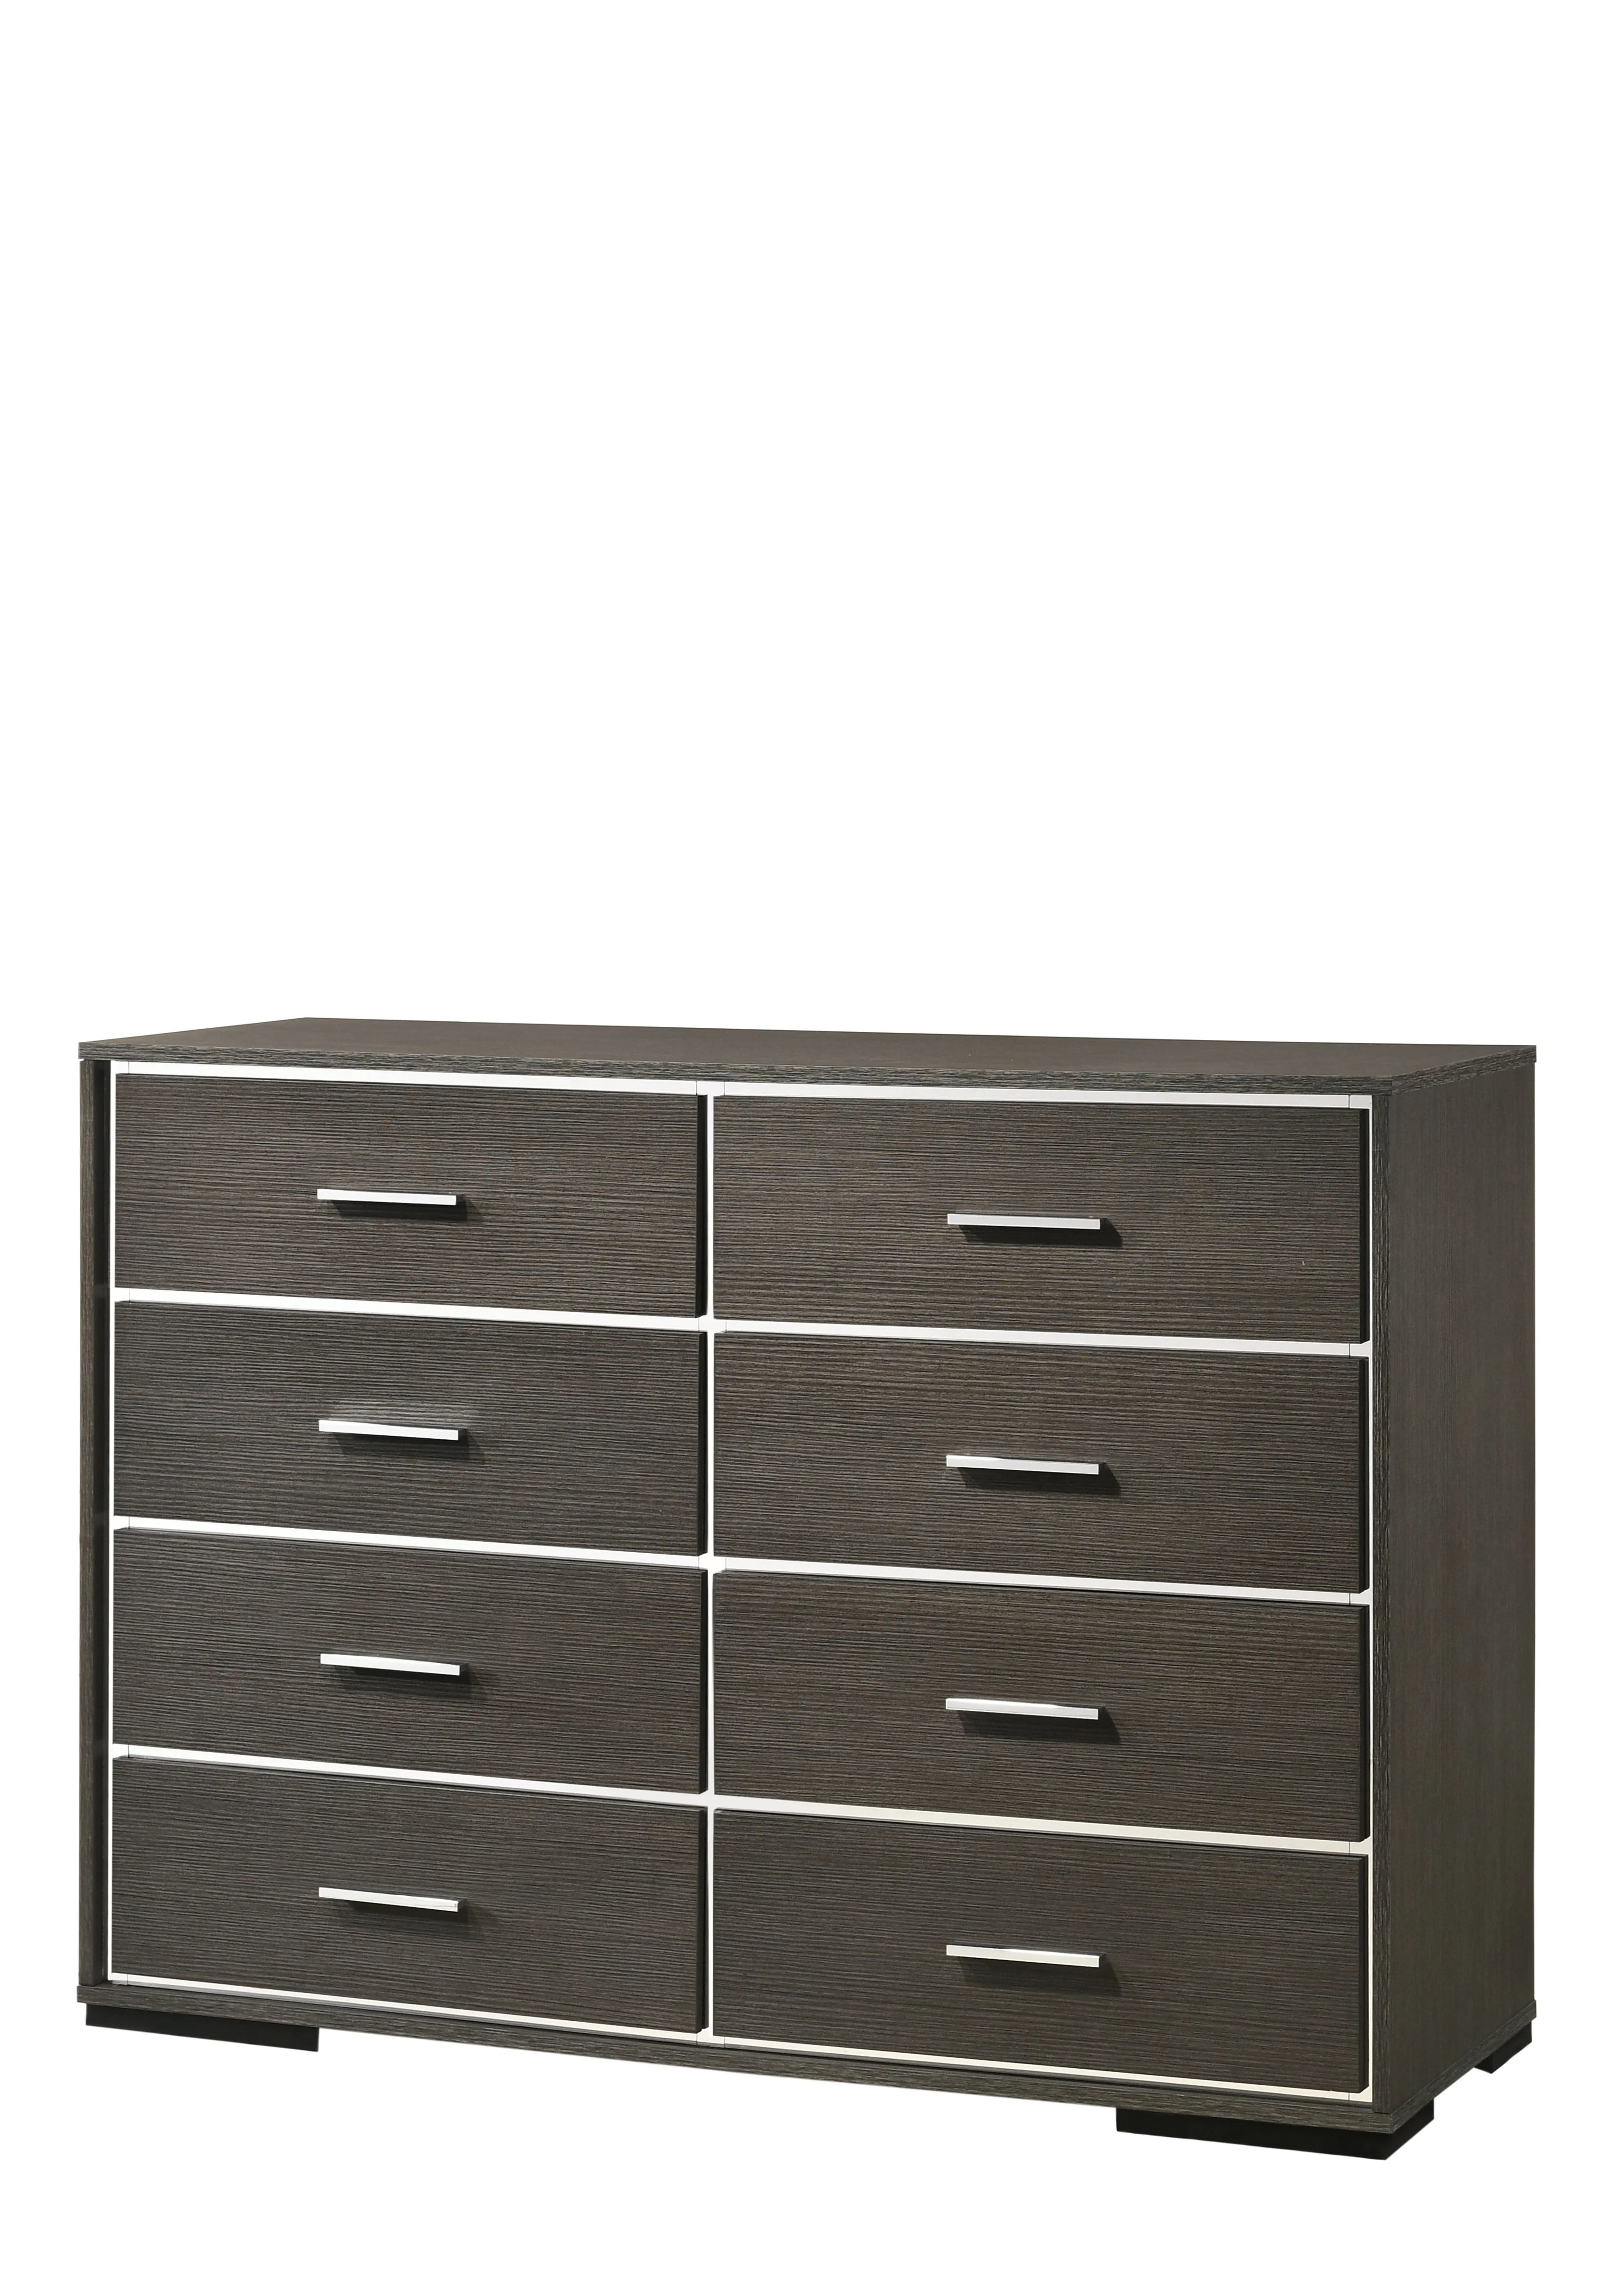 

Contemporary Dresser with 8 Draw Rustic Gray Oak Home Furniture for Bedroom Livingroom 57" x 17" x 41"H